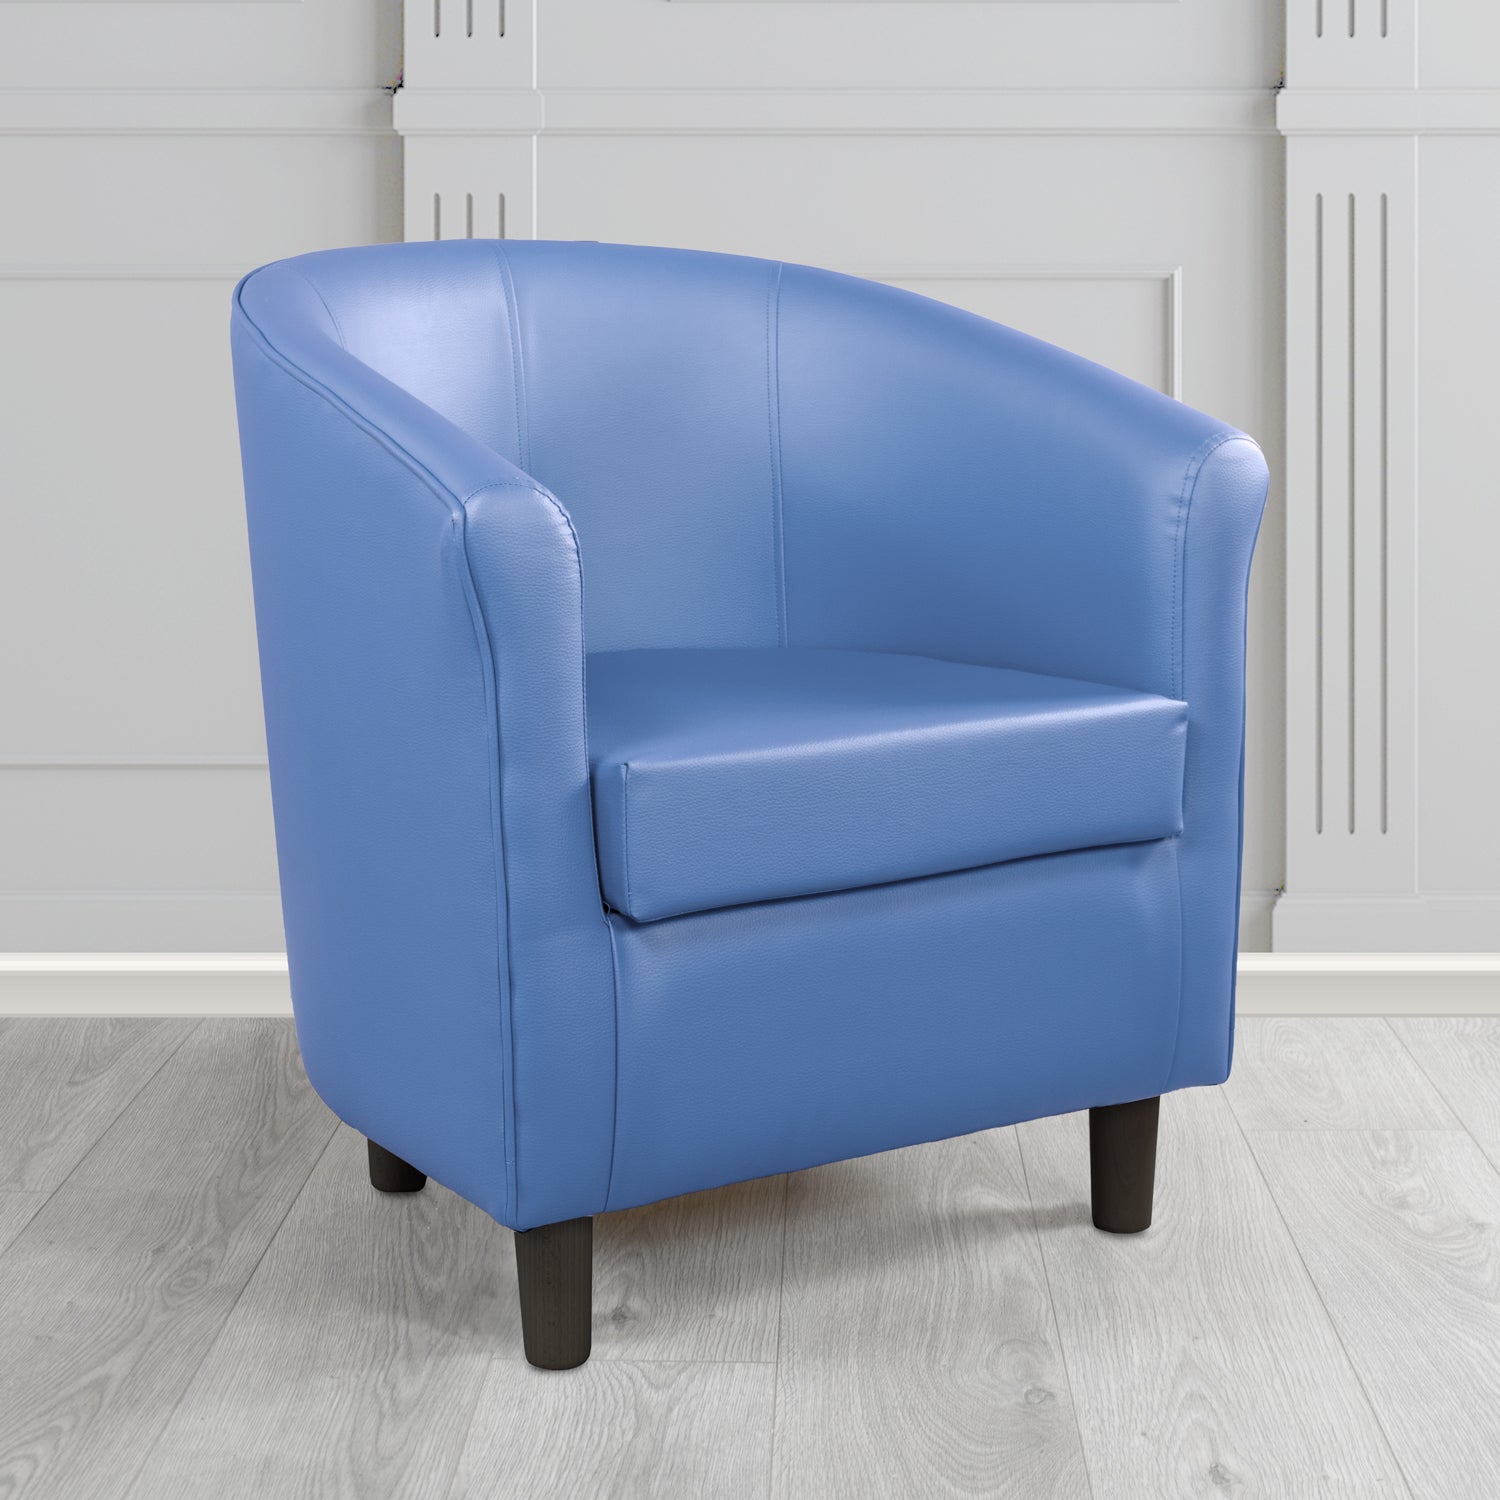 Tuscany Just Colour Blue Steel Antimicrobial Crib 5 Contract Faux Leather Tub Chair - The Tub Chair Shop